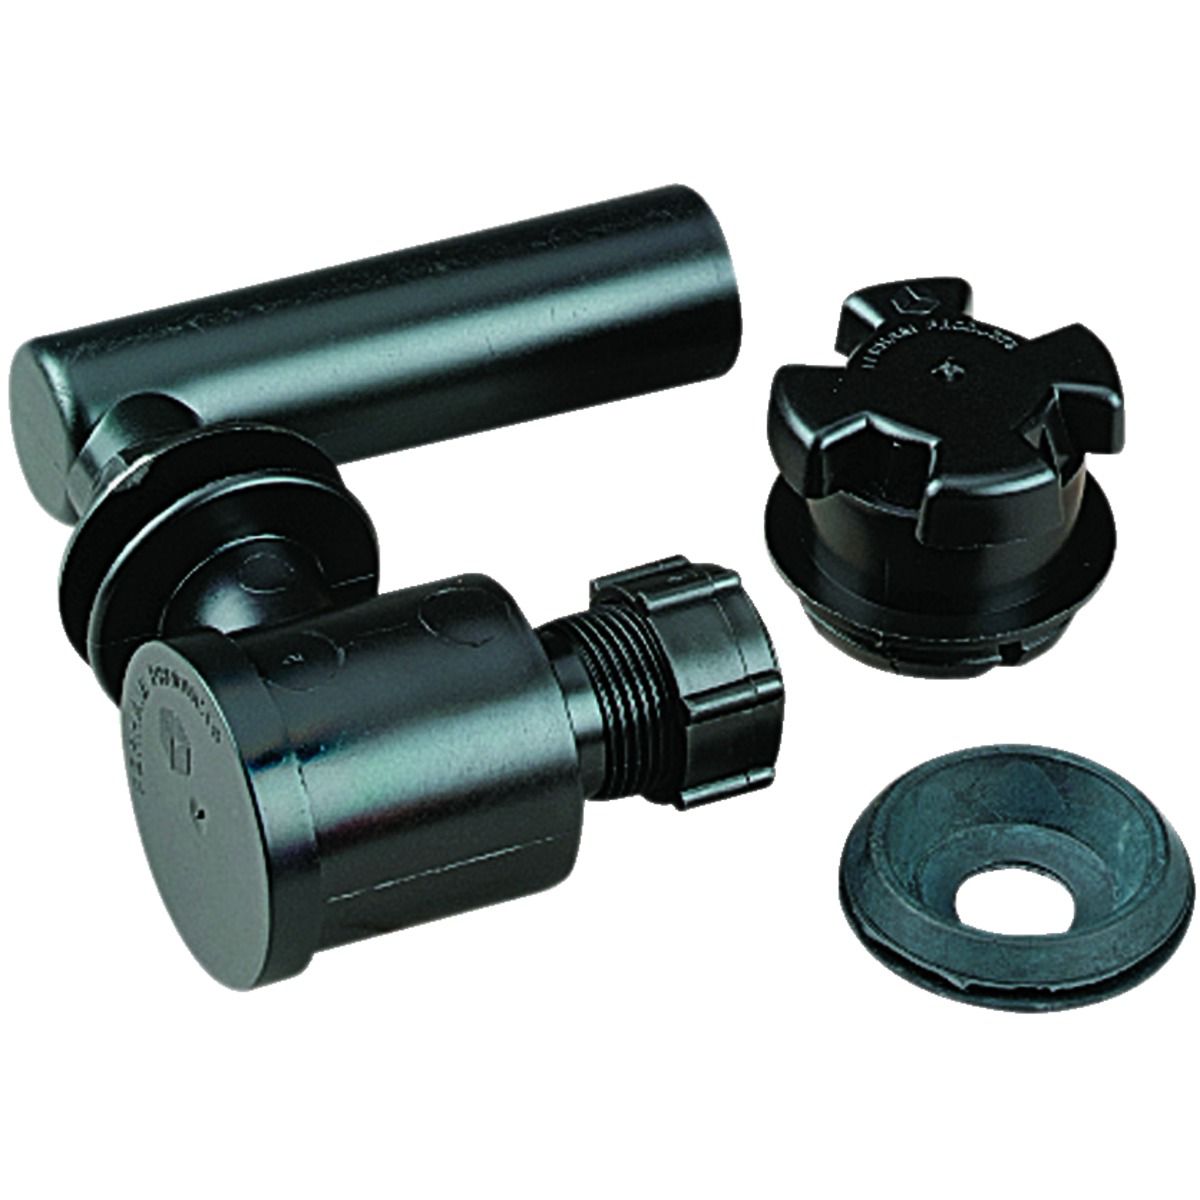 Wickes Byelaw 30 Cold Water Tank Fitting Kit - Black